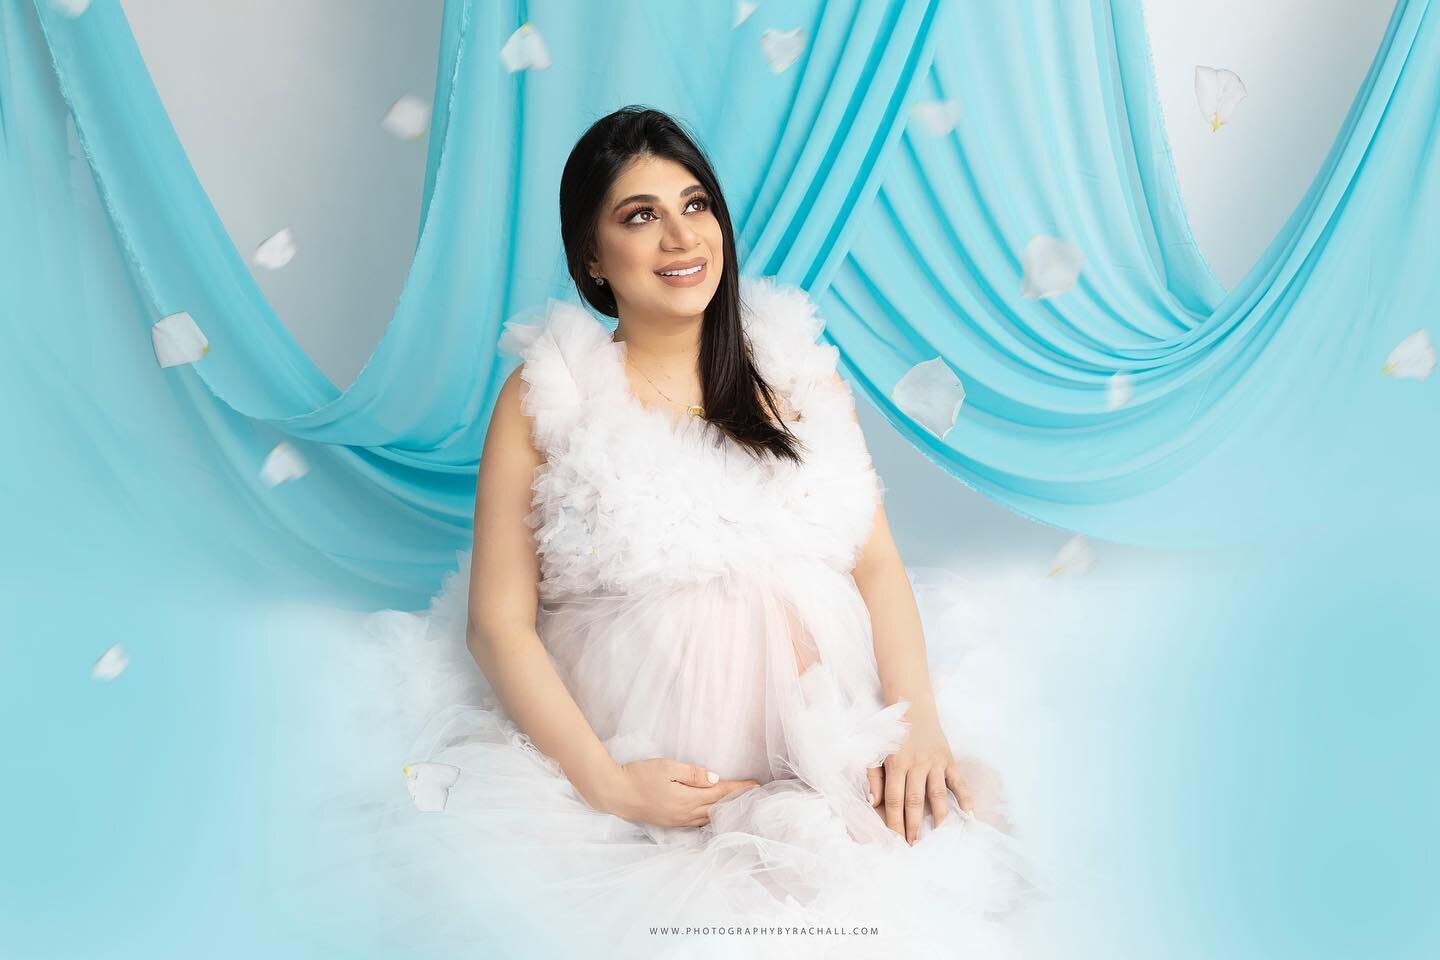 Maternity sessions to make you glow ✨ 

Bookings: +96170415050 or click the CONTACT BUTTON 

#newborns#newbornphotography #newbornworkshop #newbornphotographer #pregnancyphotoshoot #pregnancyphotography #maternityphotography #babyphotography #photogr